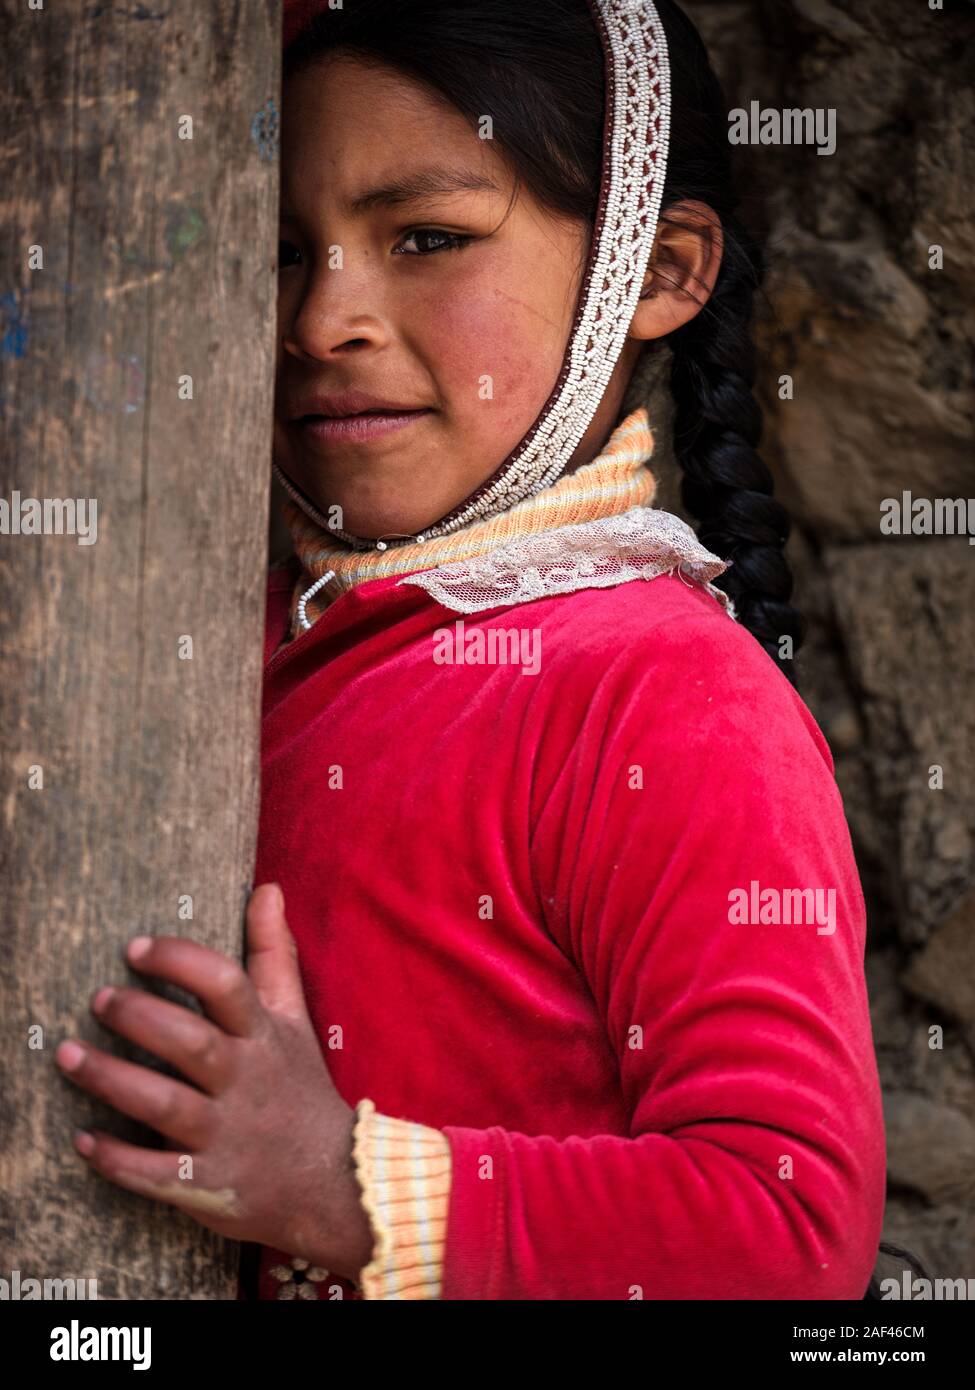 OLLANTAYTAMBO, PERU - CIRCA SEPTEMBER 2019:  Portrait of kid from the andean community of Willoq close to Ollantaytambo in the Sacred Valley of Peru. Stock Photo